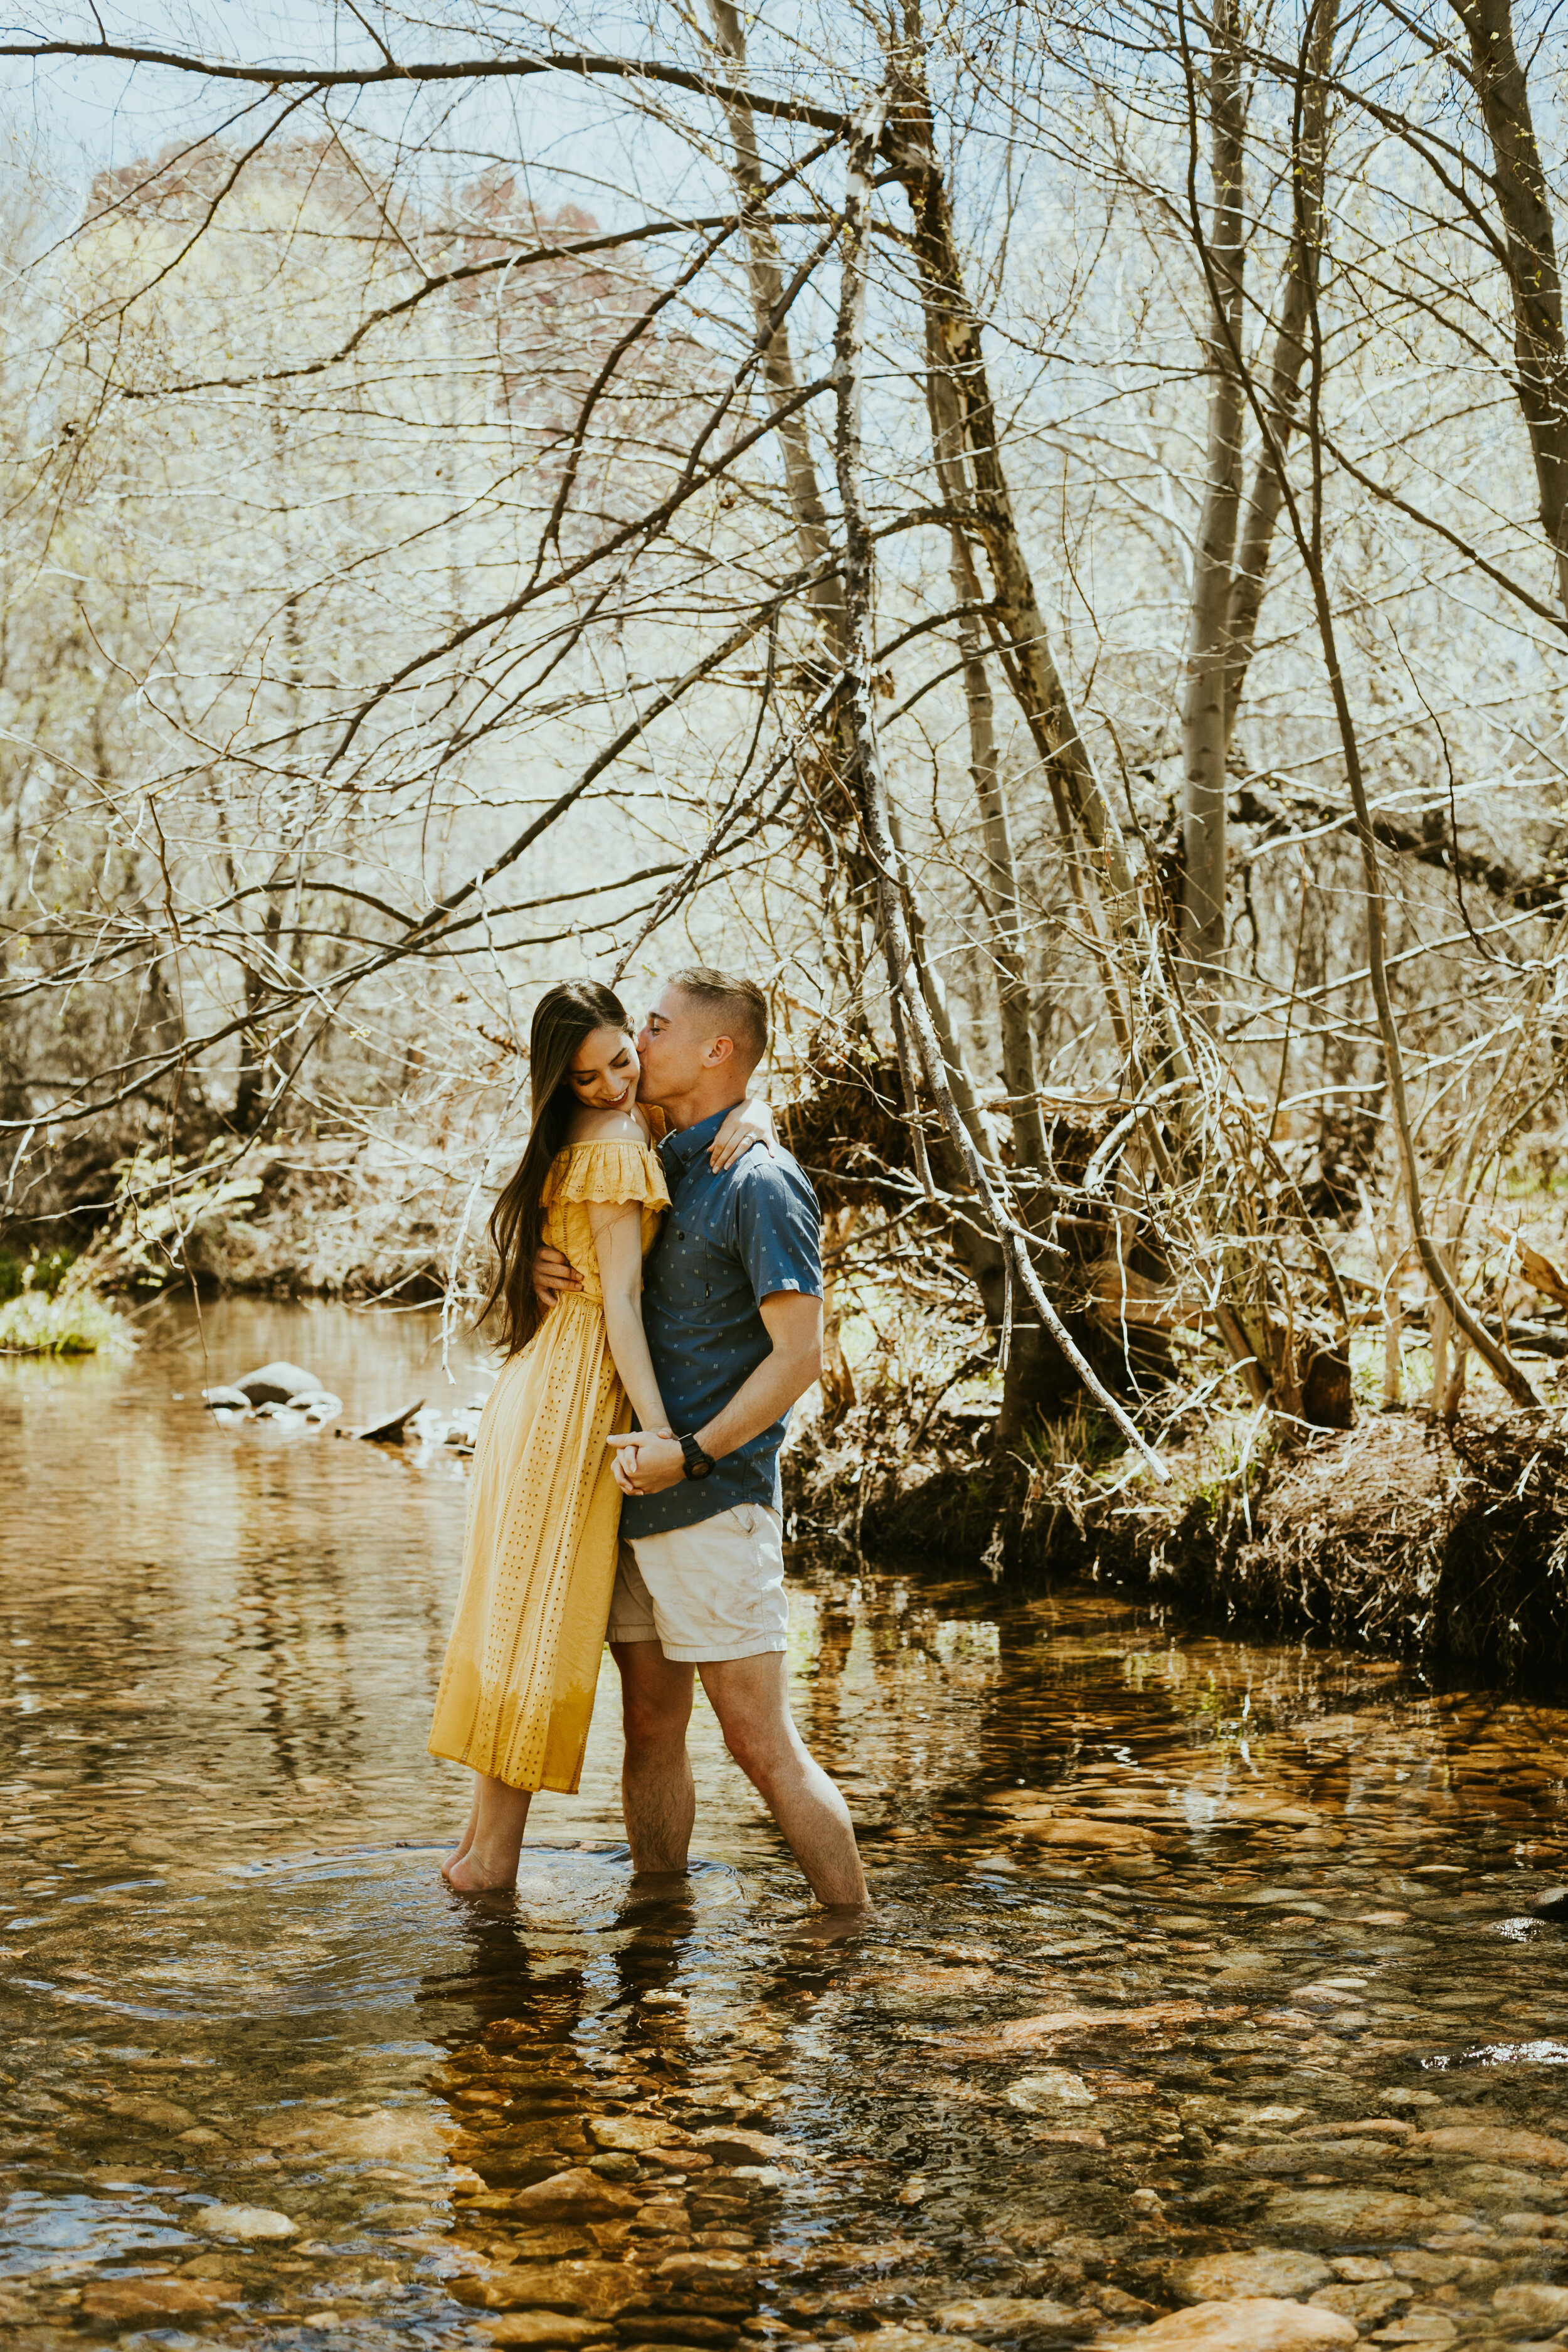 red rock crossing sedona arizona cathedral rock crescent moon ranch couple photos engagement photo outfit inspiration couple posing ideas midday photos anniversary photos-20.jpg